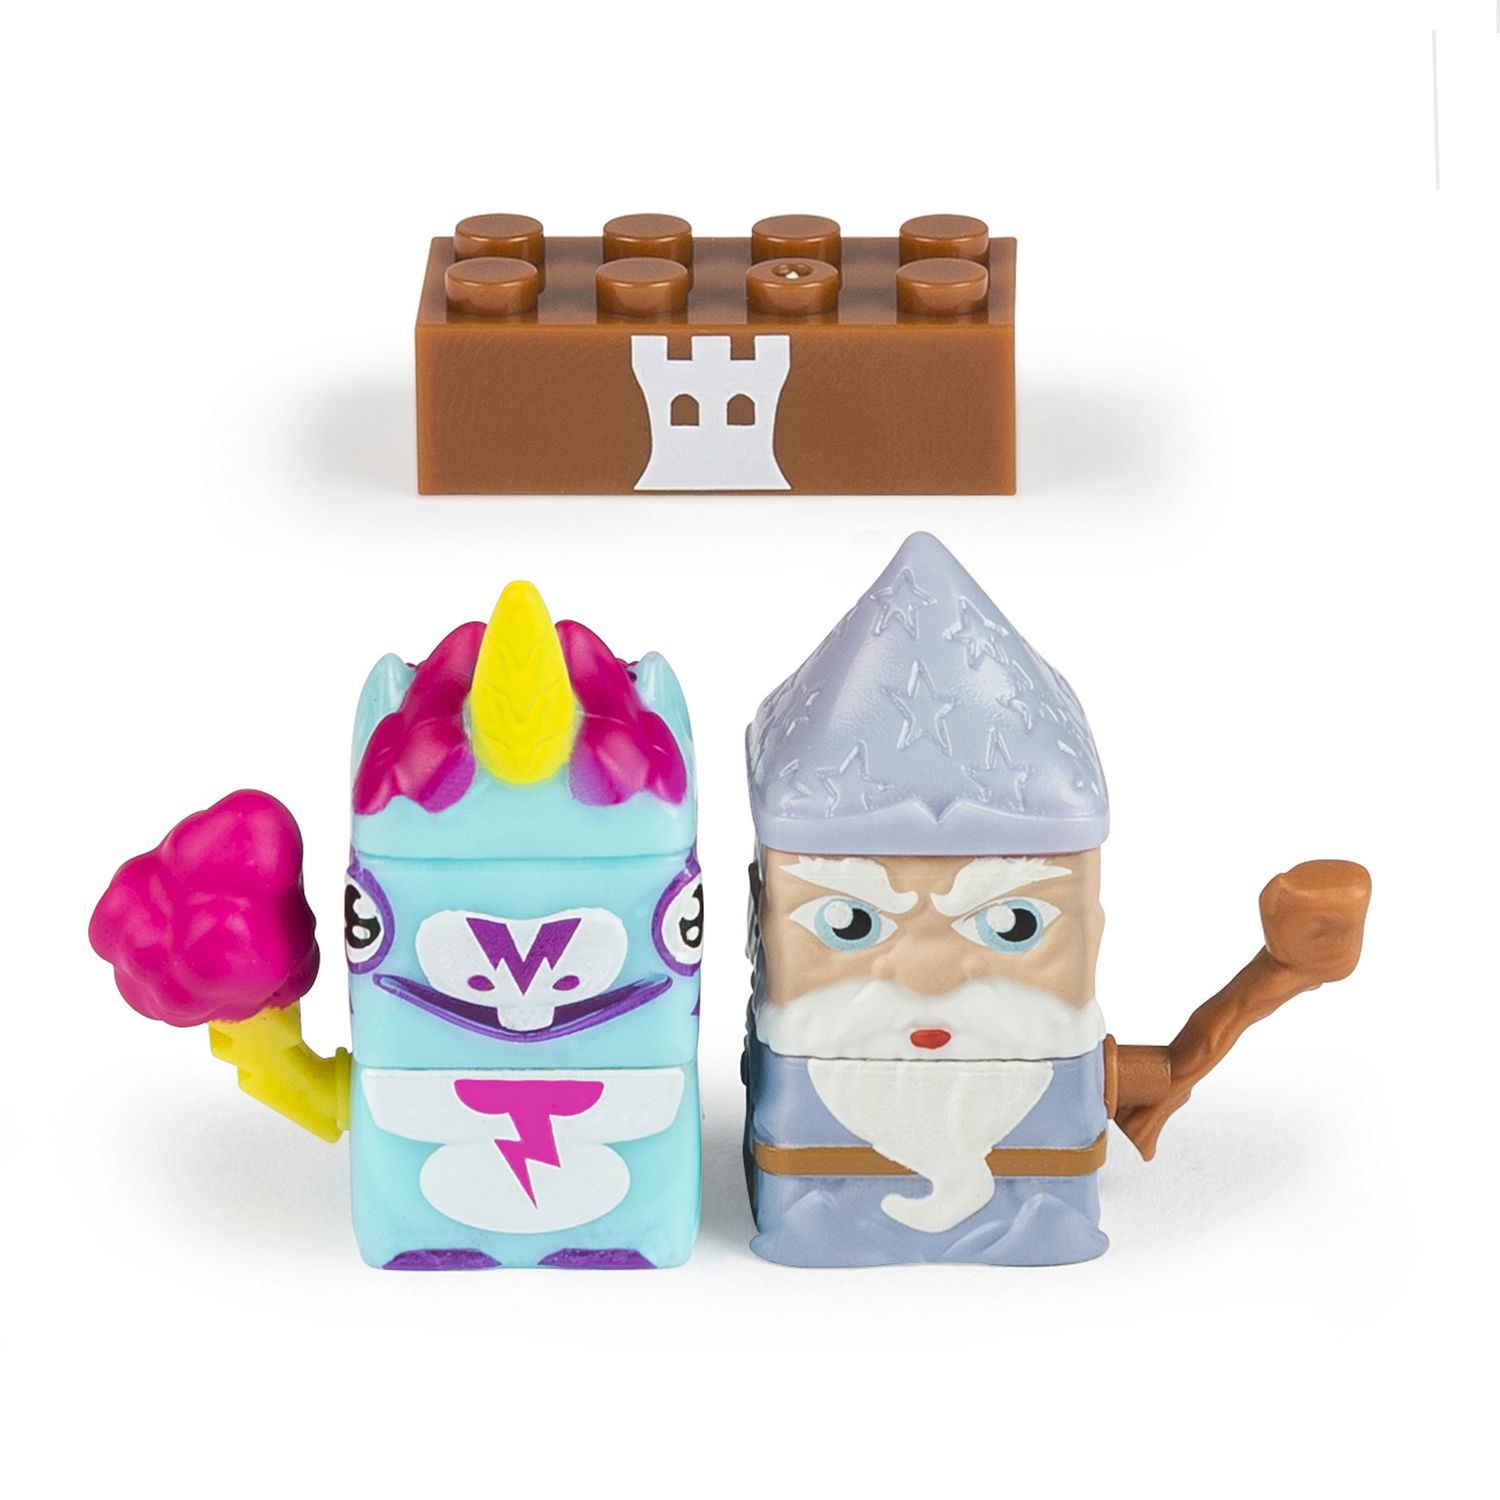 Sick Bricks Double Character Pack Double Rainbow Wizzy Beardall Walmart Canada - roblox figures with code toys games bricks figurines on carousell